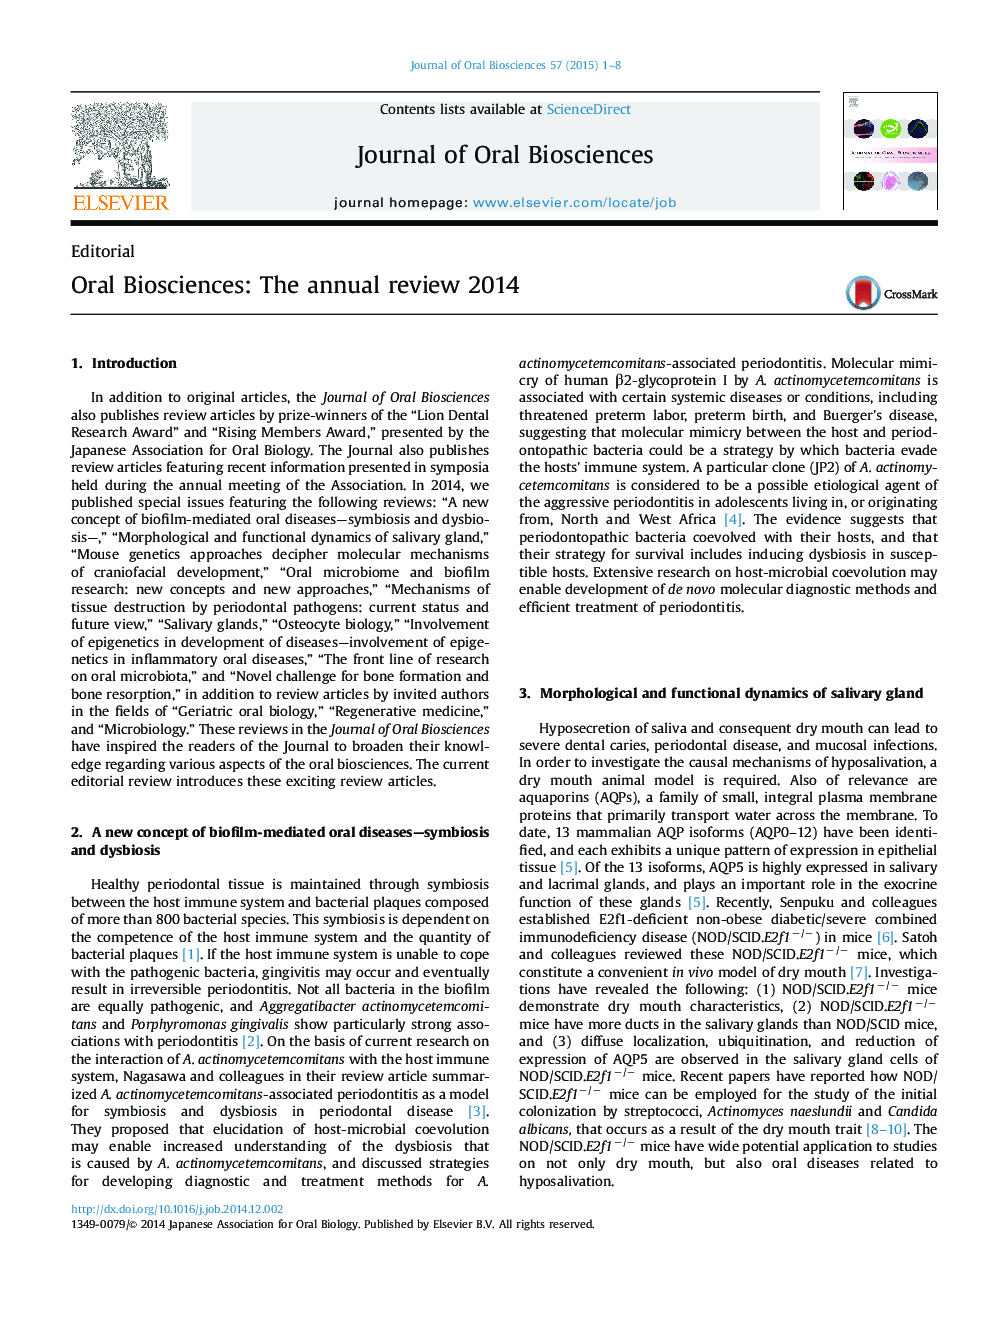 Oral Biosciences: The annual review 2014